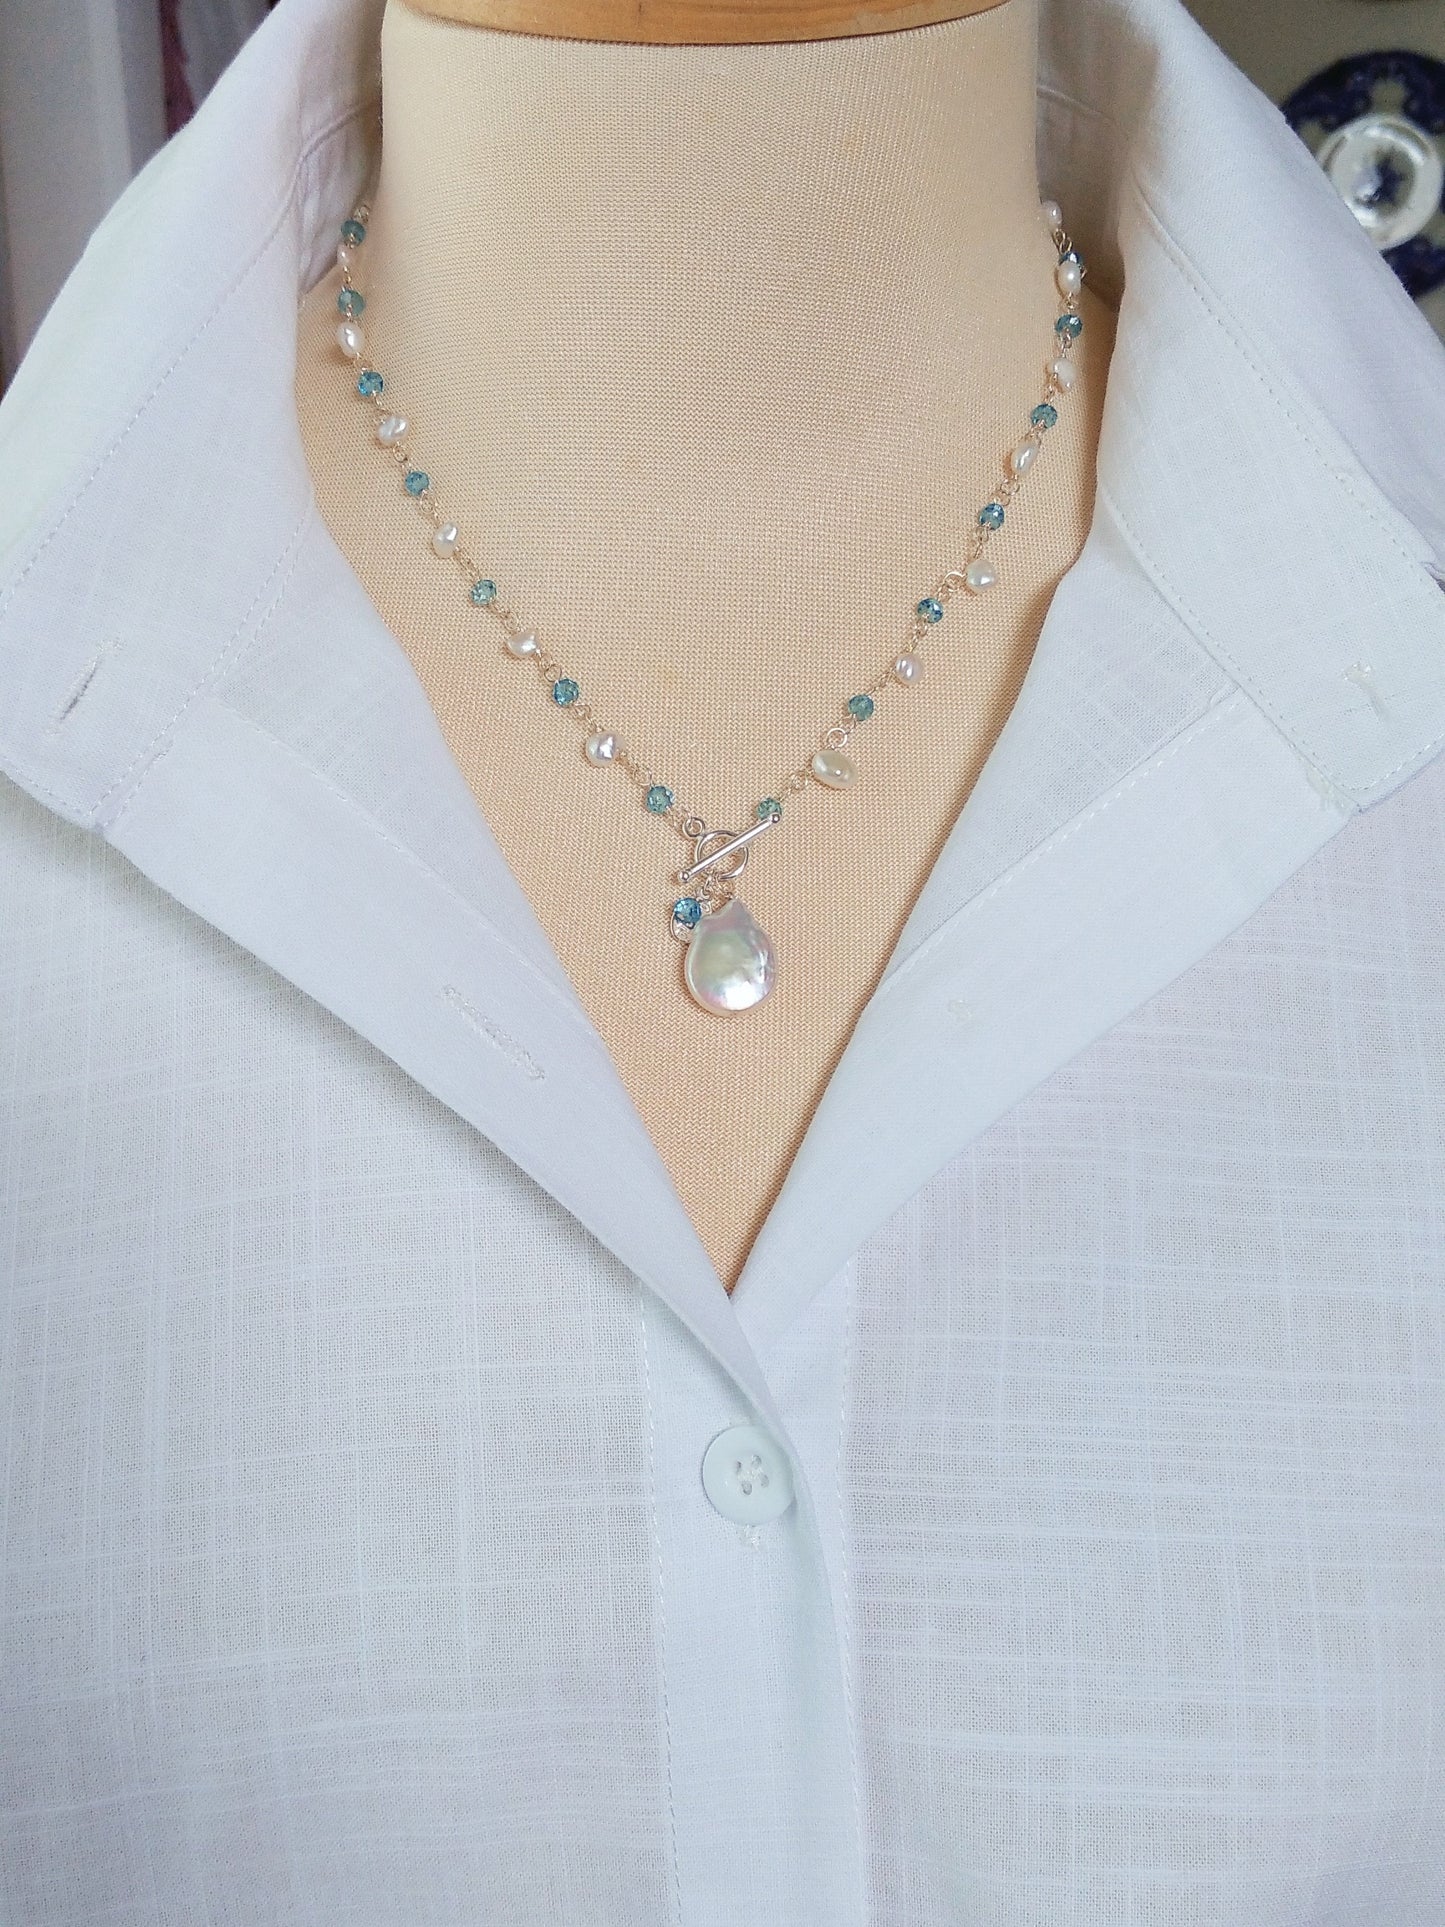 Blue Topaz & Keshi Pearl Sterling Silver Necklace - Harlow